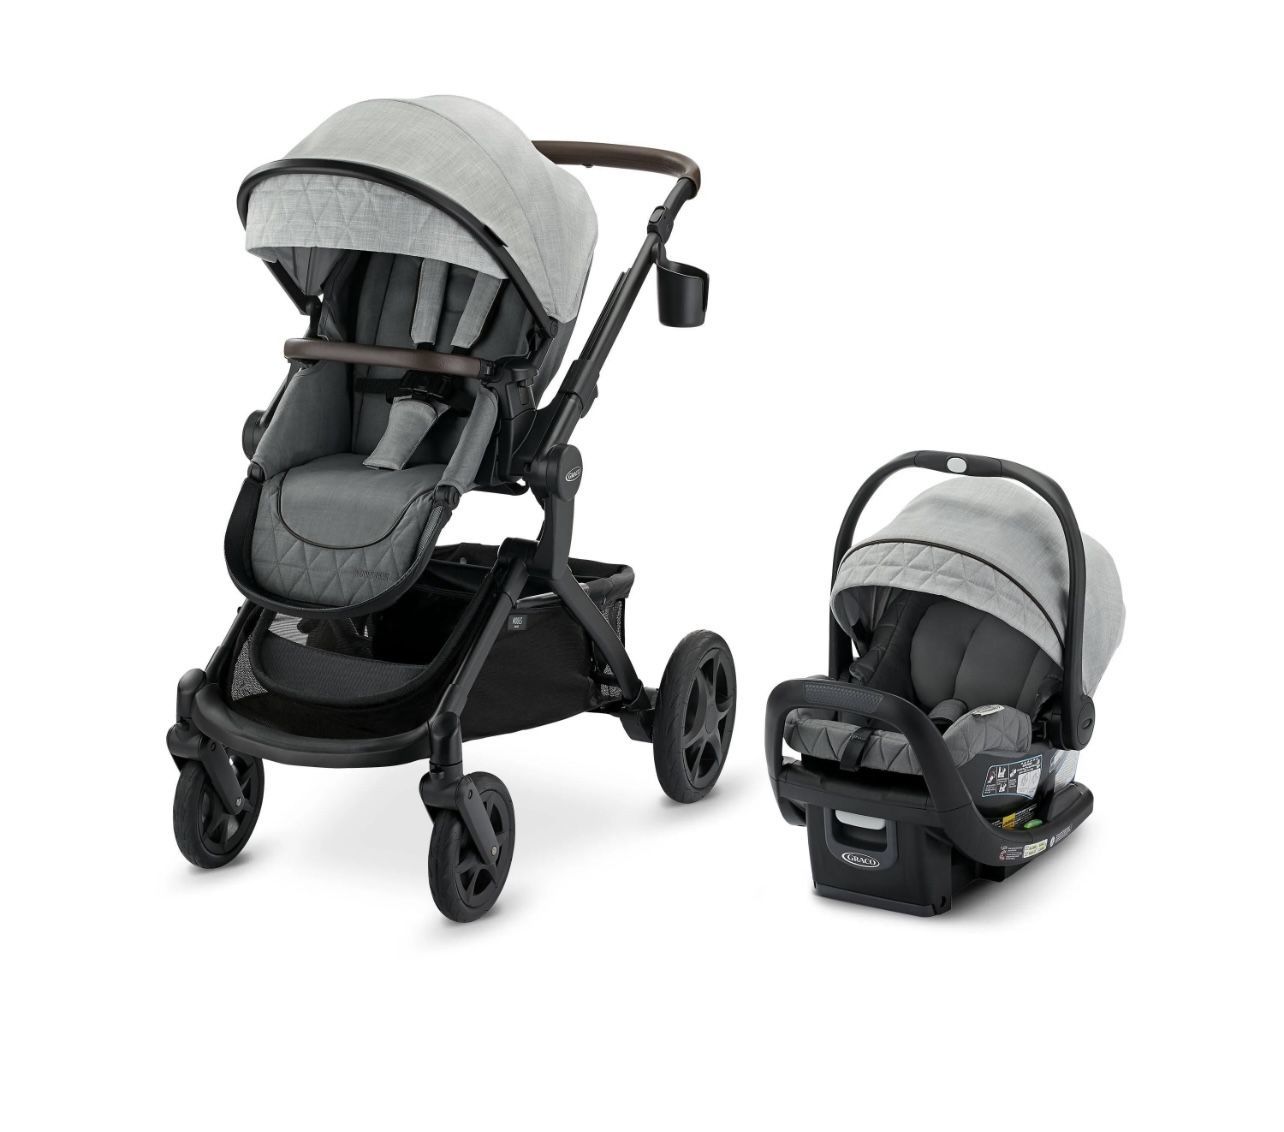 Graco Premier Modes Nest 3-In-1 Travel System